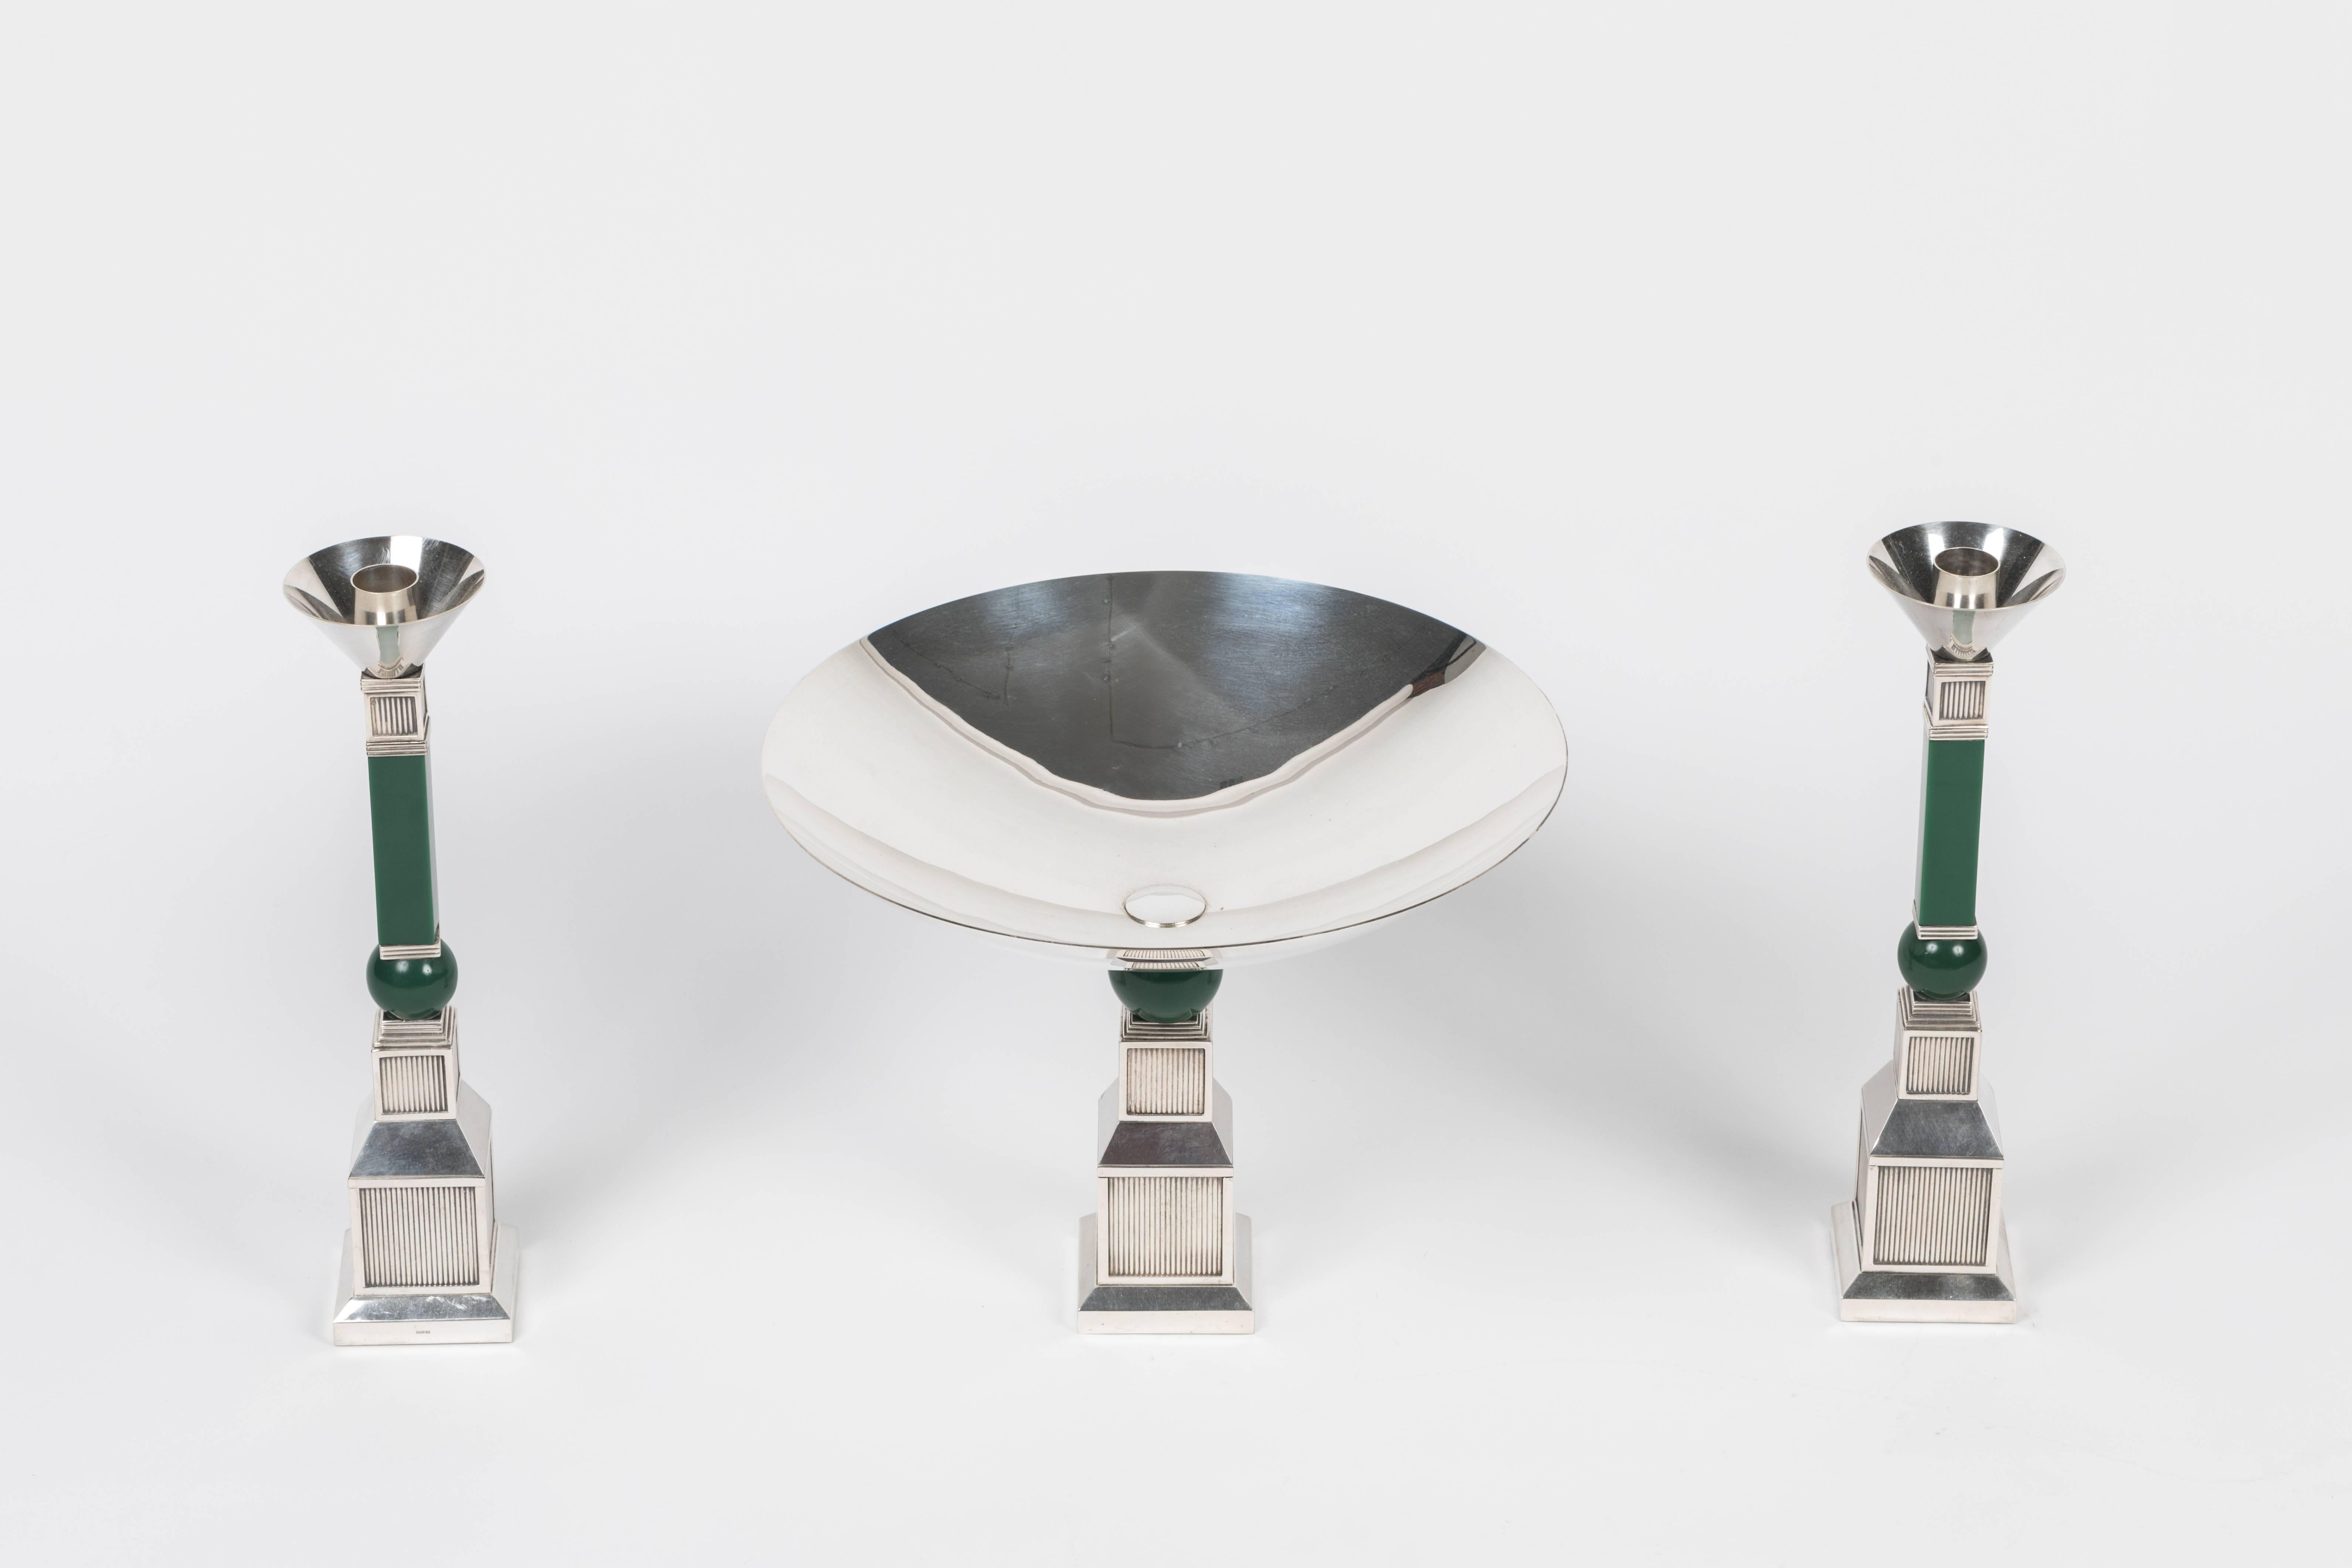 This is a rare opportunity to purchase this period Gucci table garniture consisting of a compote and a pair of candlesticks. Created in the 1970s when the interest in the Art Deco was high this set takes its design cues from that wonderful period.